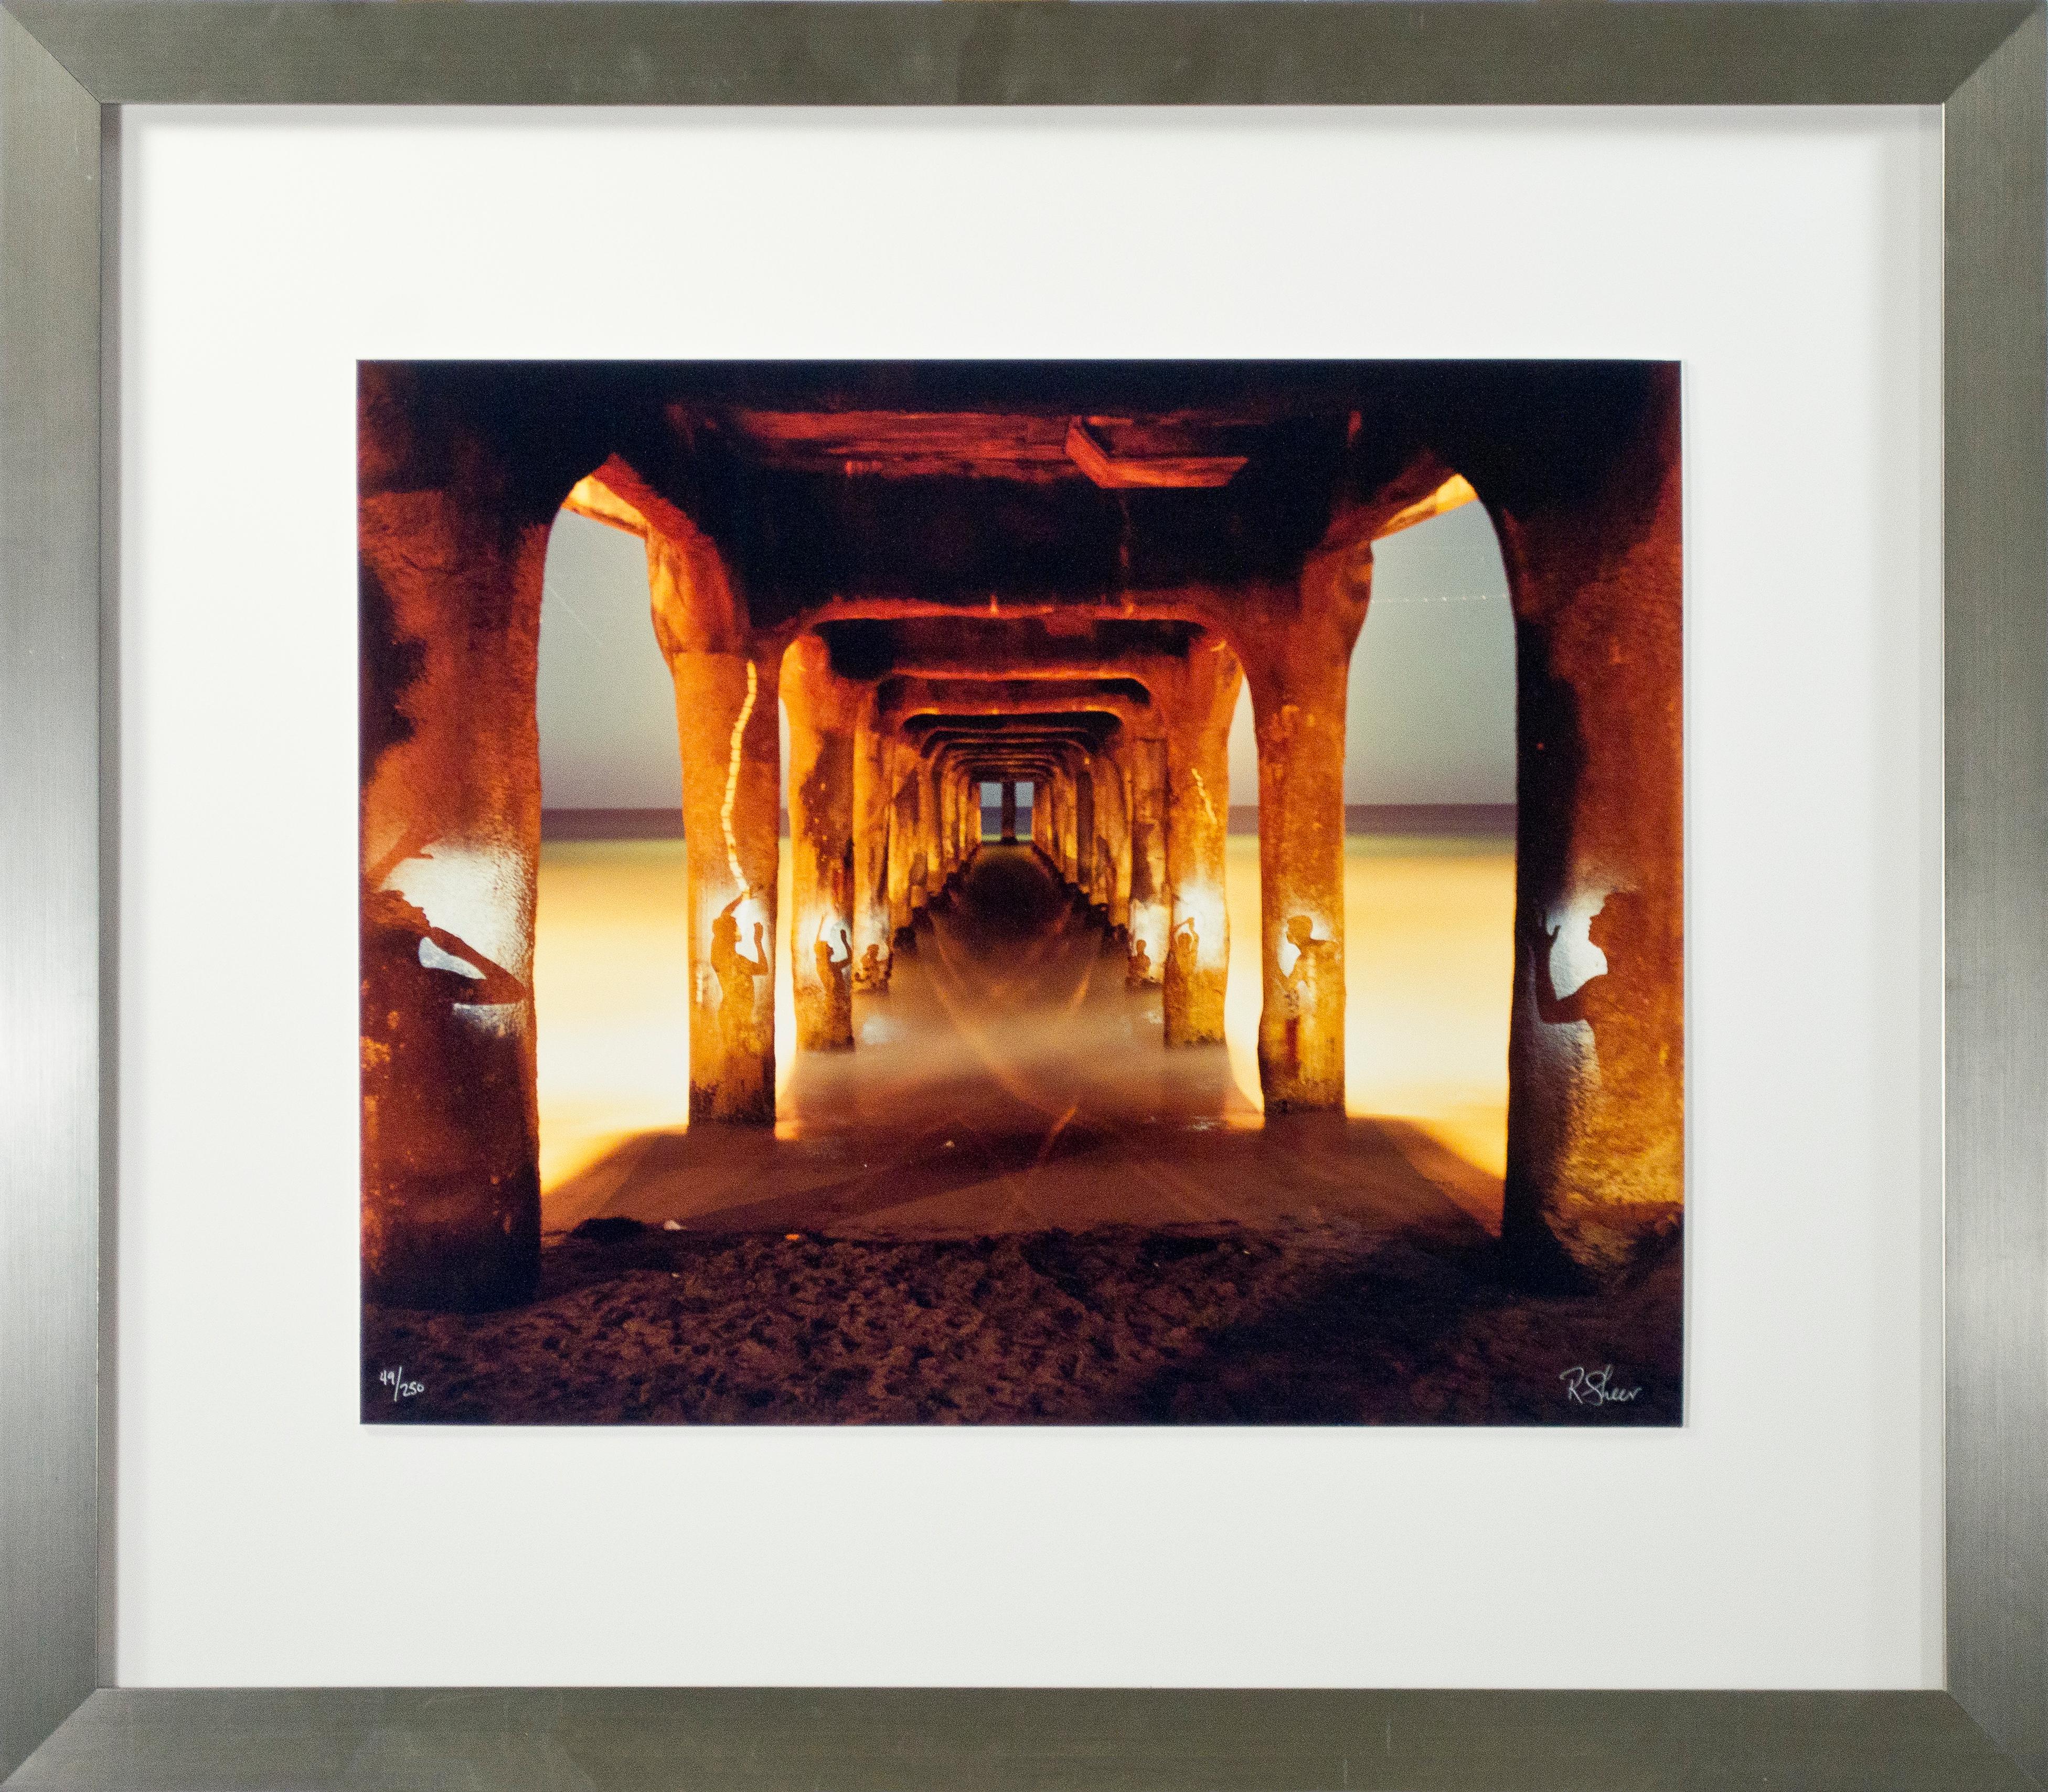 'Under the Manhattan Beach Pier No. 2' exemplifies the long-exposure photography of Robert Kawika Sheer. The artist signed this piece in the lower right and editioned it in the lower left. Edition: 49/250. Sheer has the camera looking down the long